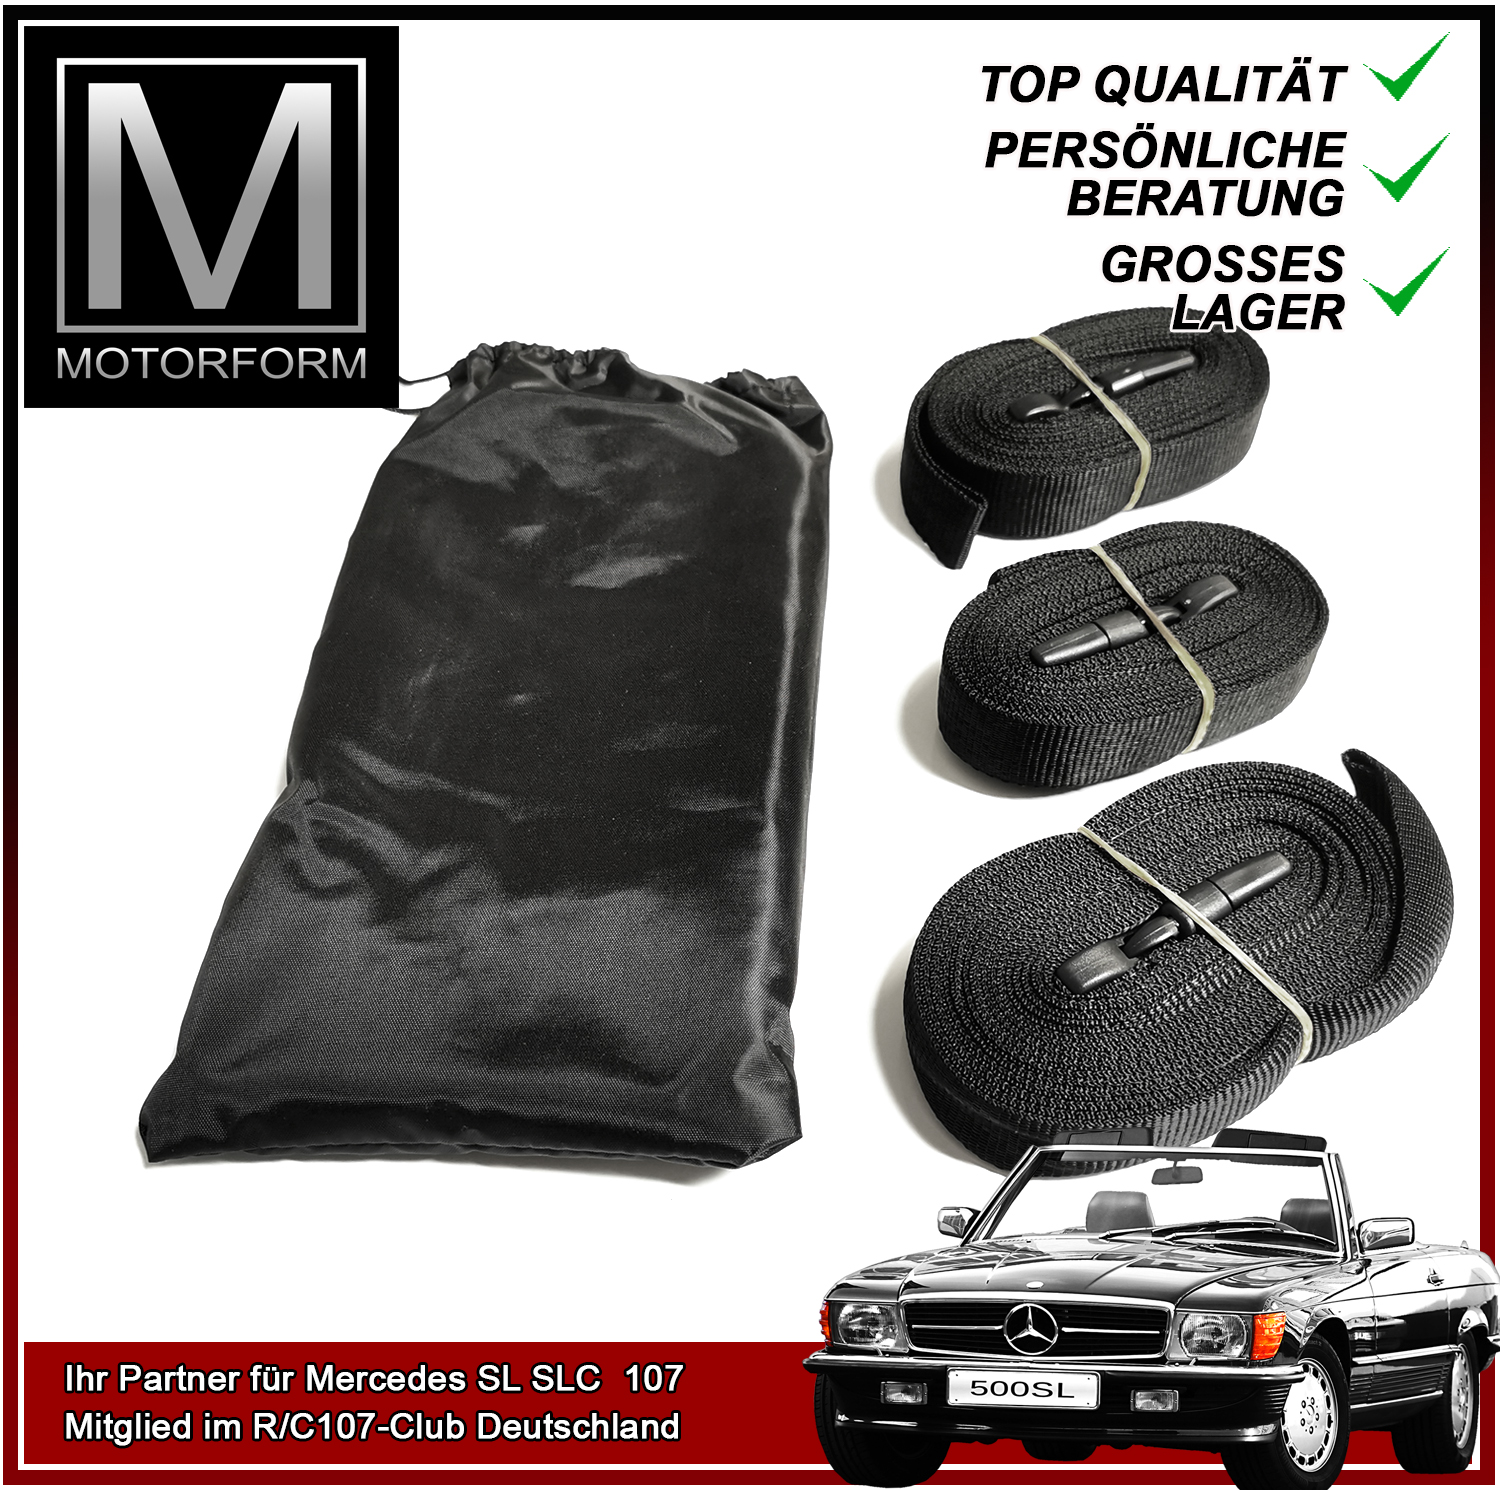 3 Pieces Over Body Strap Set for Mercedes SL-Class R129 (1989-20